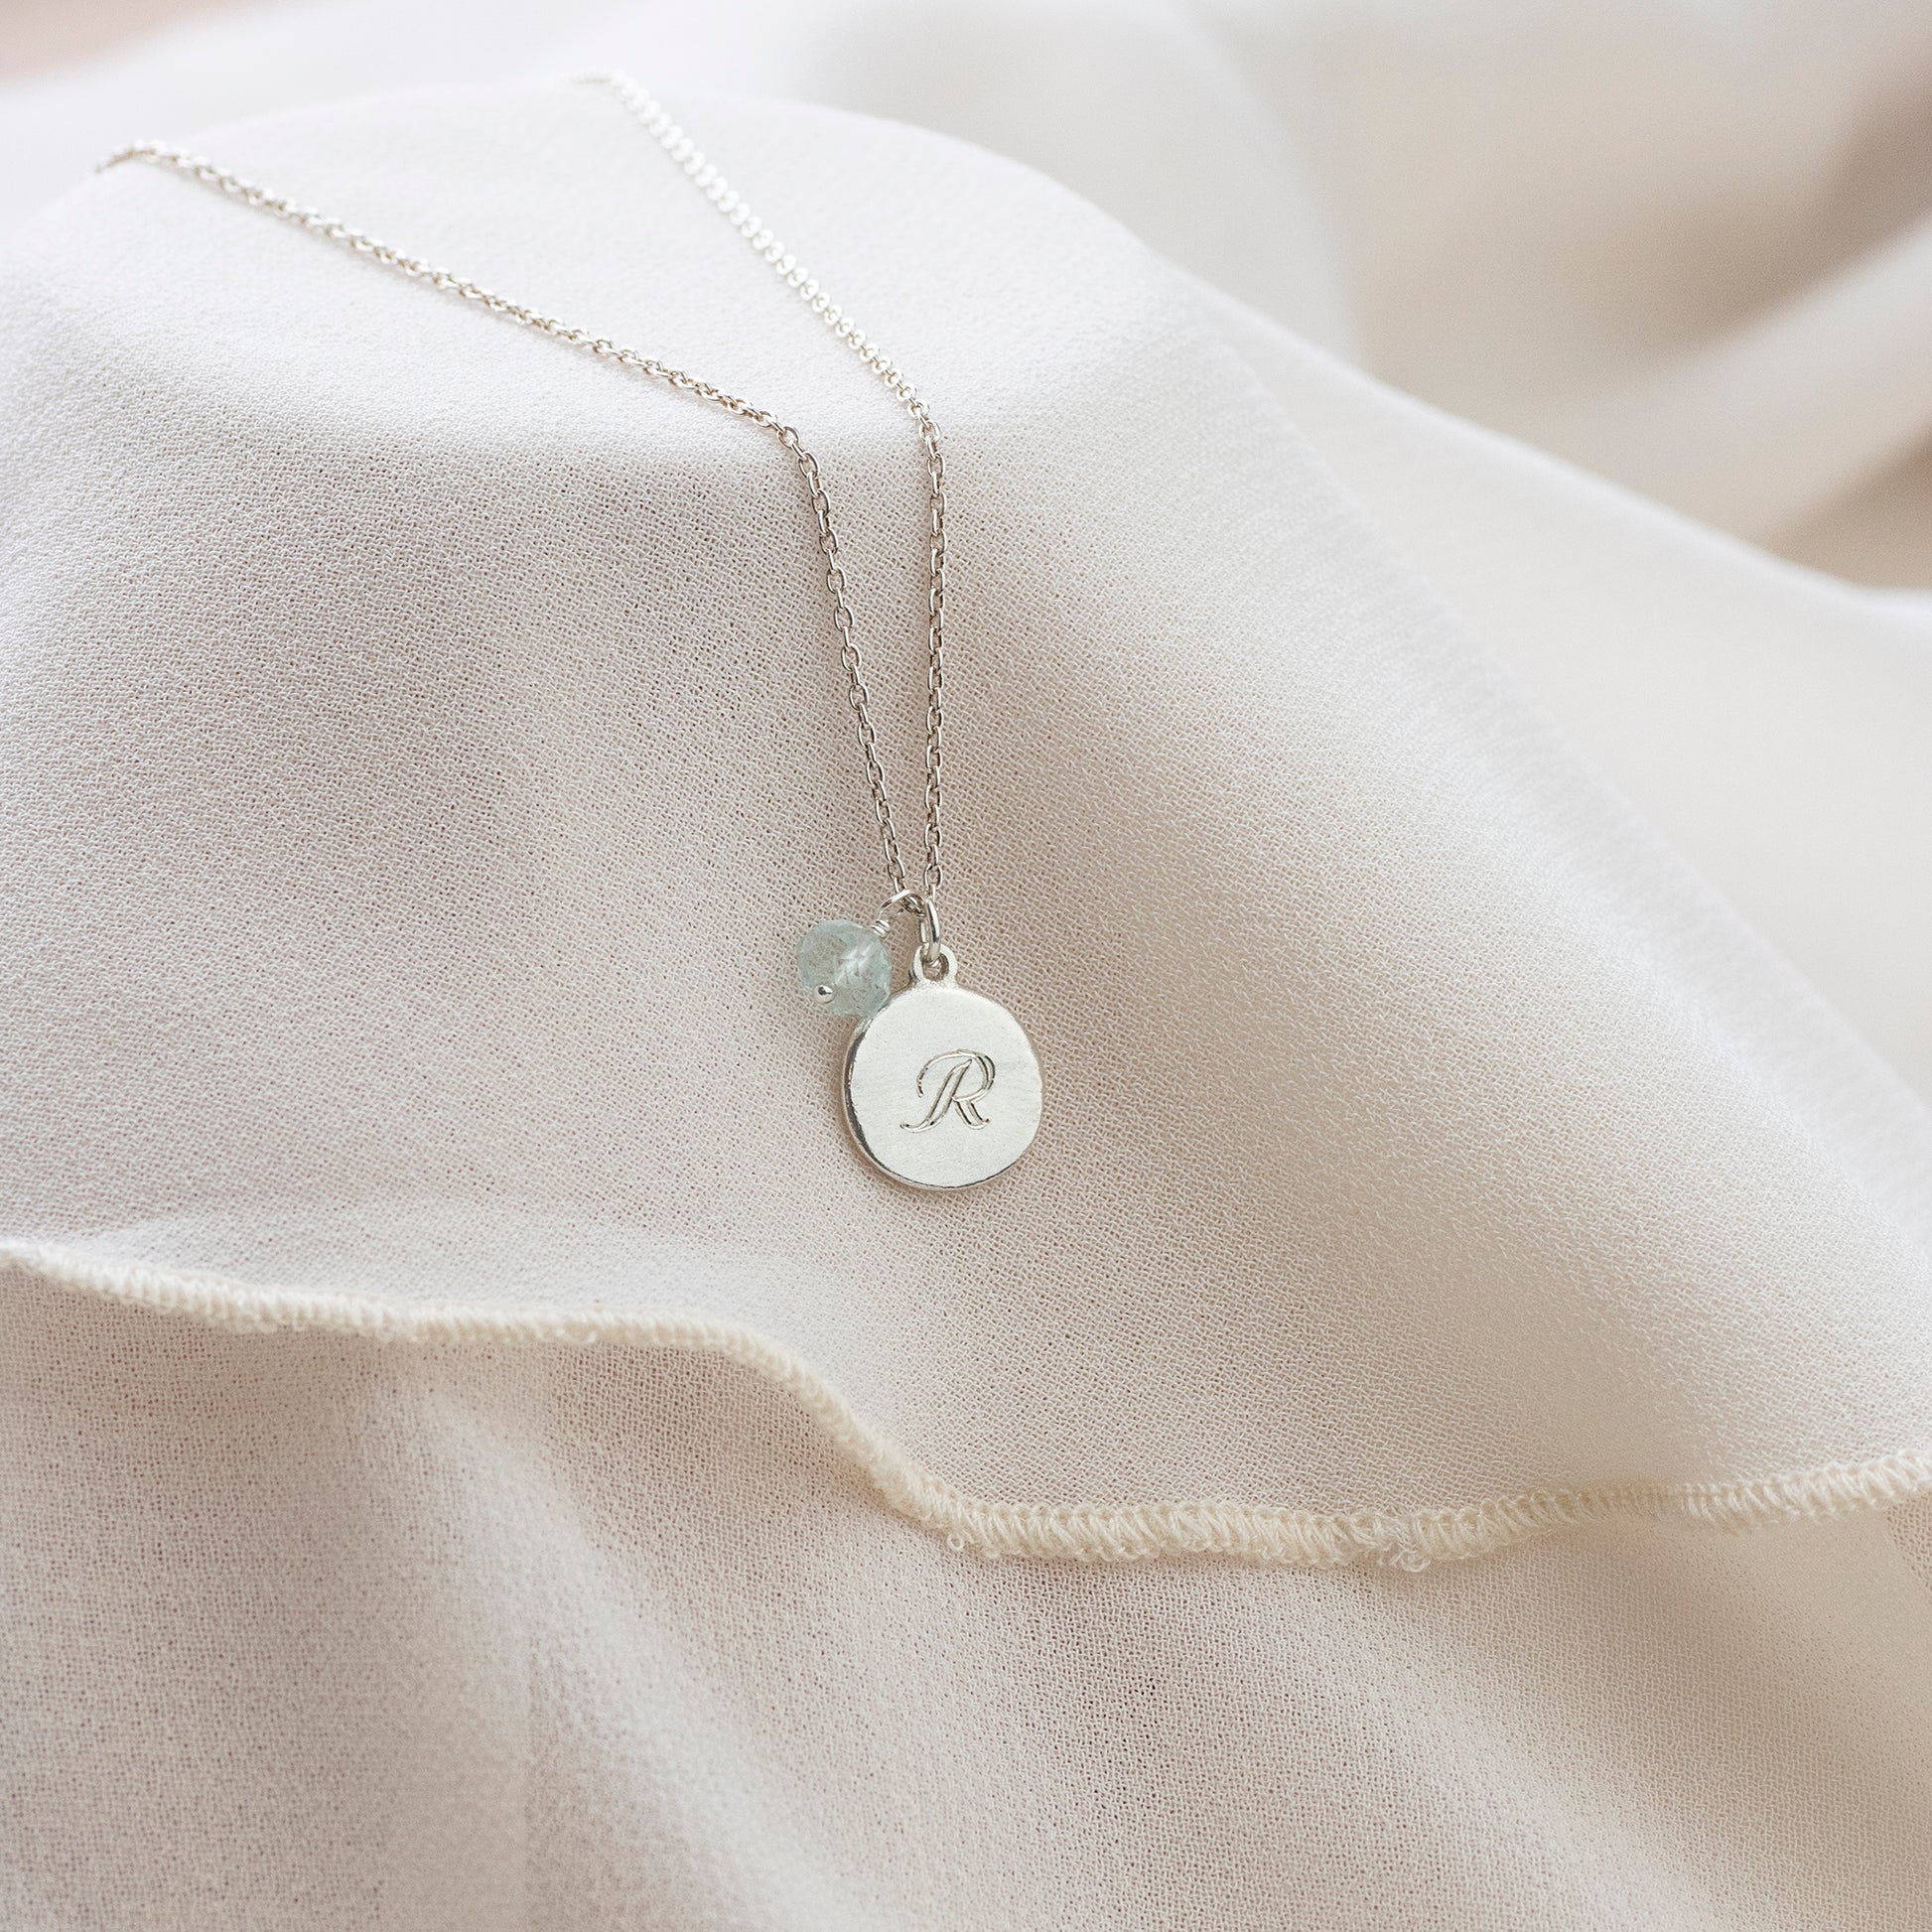 Wedding Day Gift for Bride - Personalised Initial Pendant - Silver